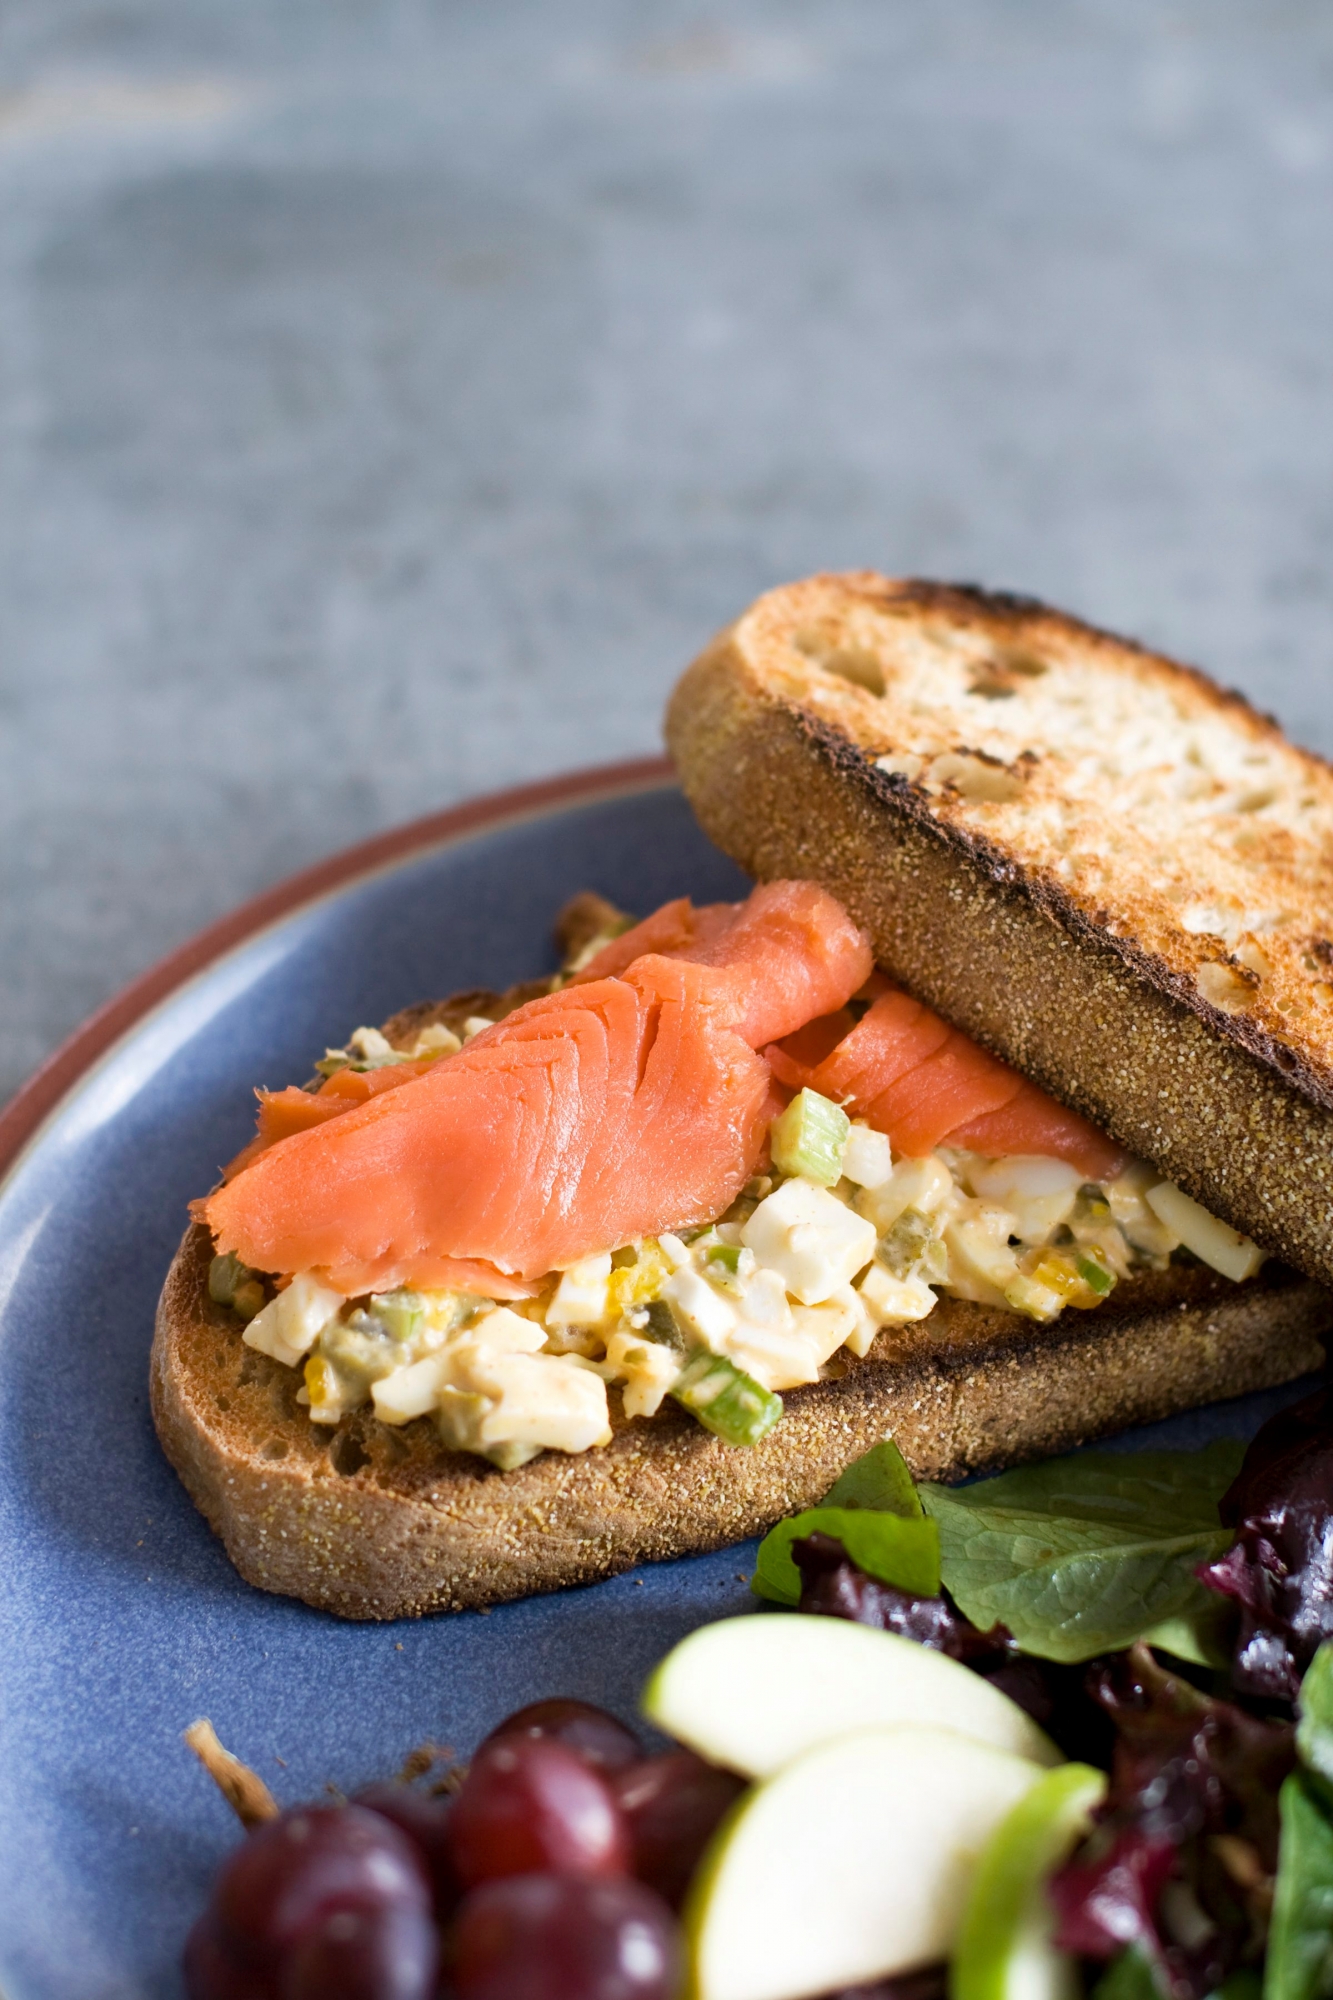 In this image taken on April 1, 2013, an egg salad sandwich with smoked salmon is shown served on a plate in Concord, N.H. (AP Photo/Matthew Mead) Food-Deadline-Egg Salad Sandwich